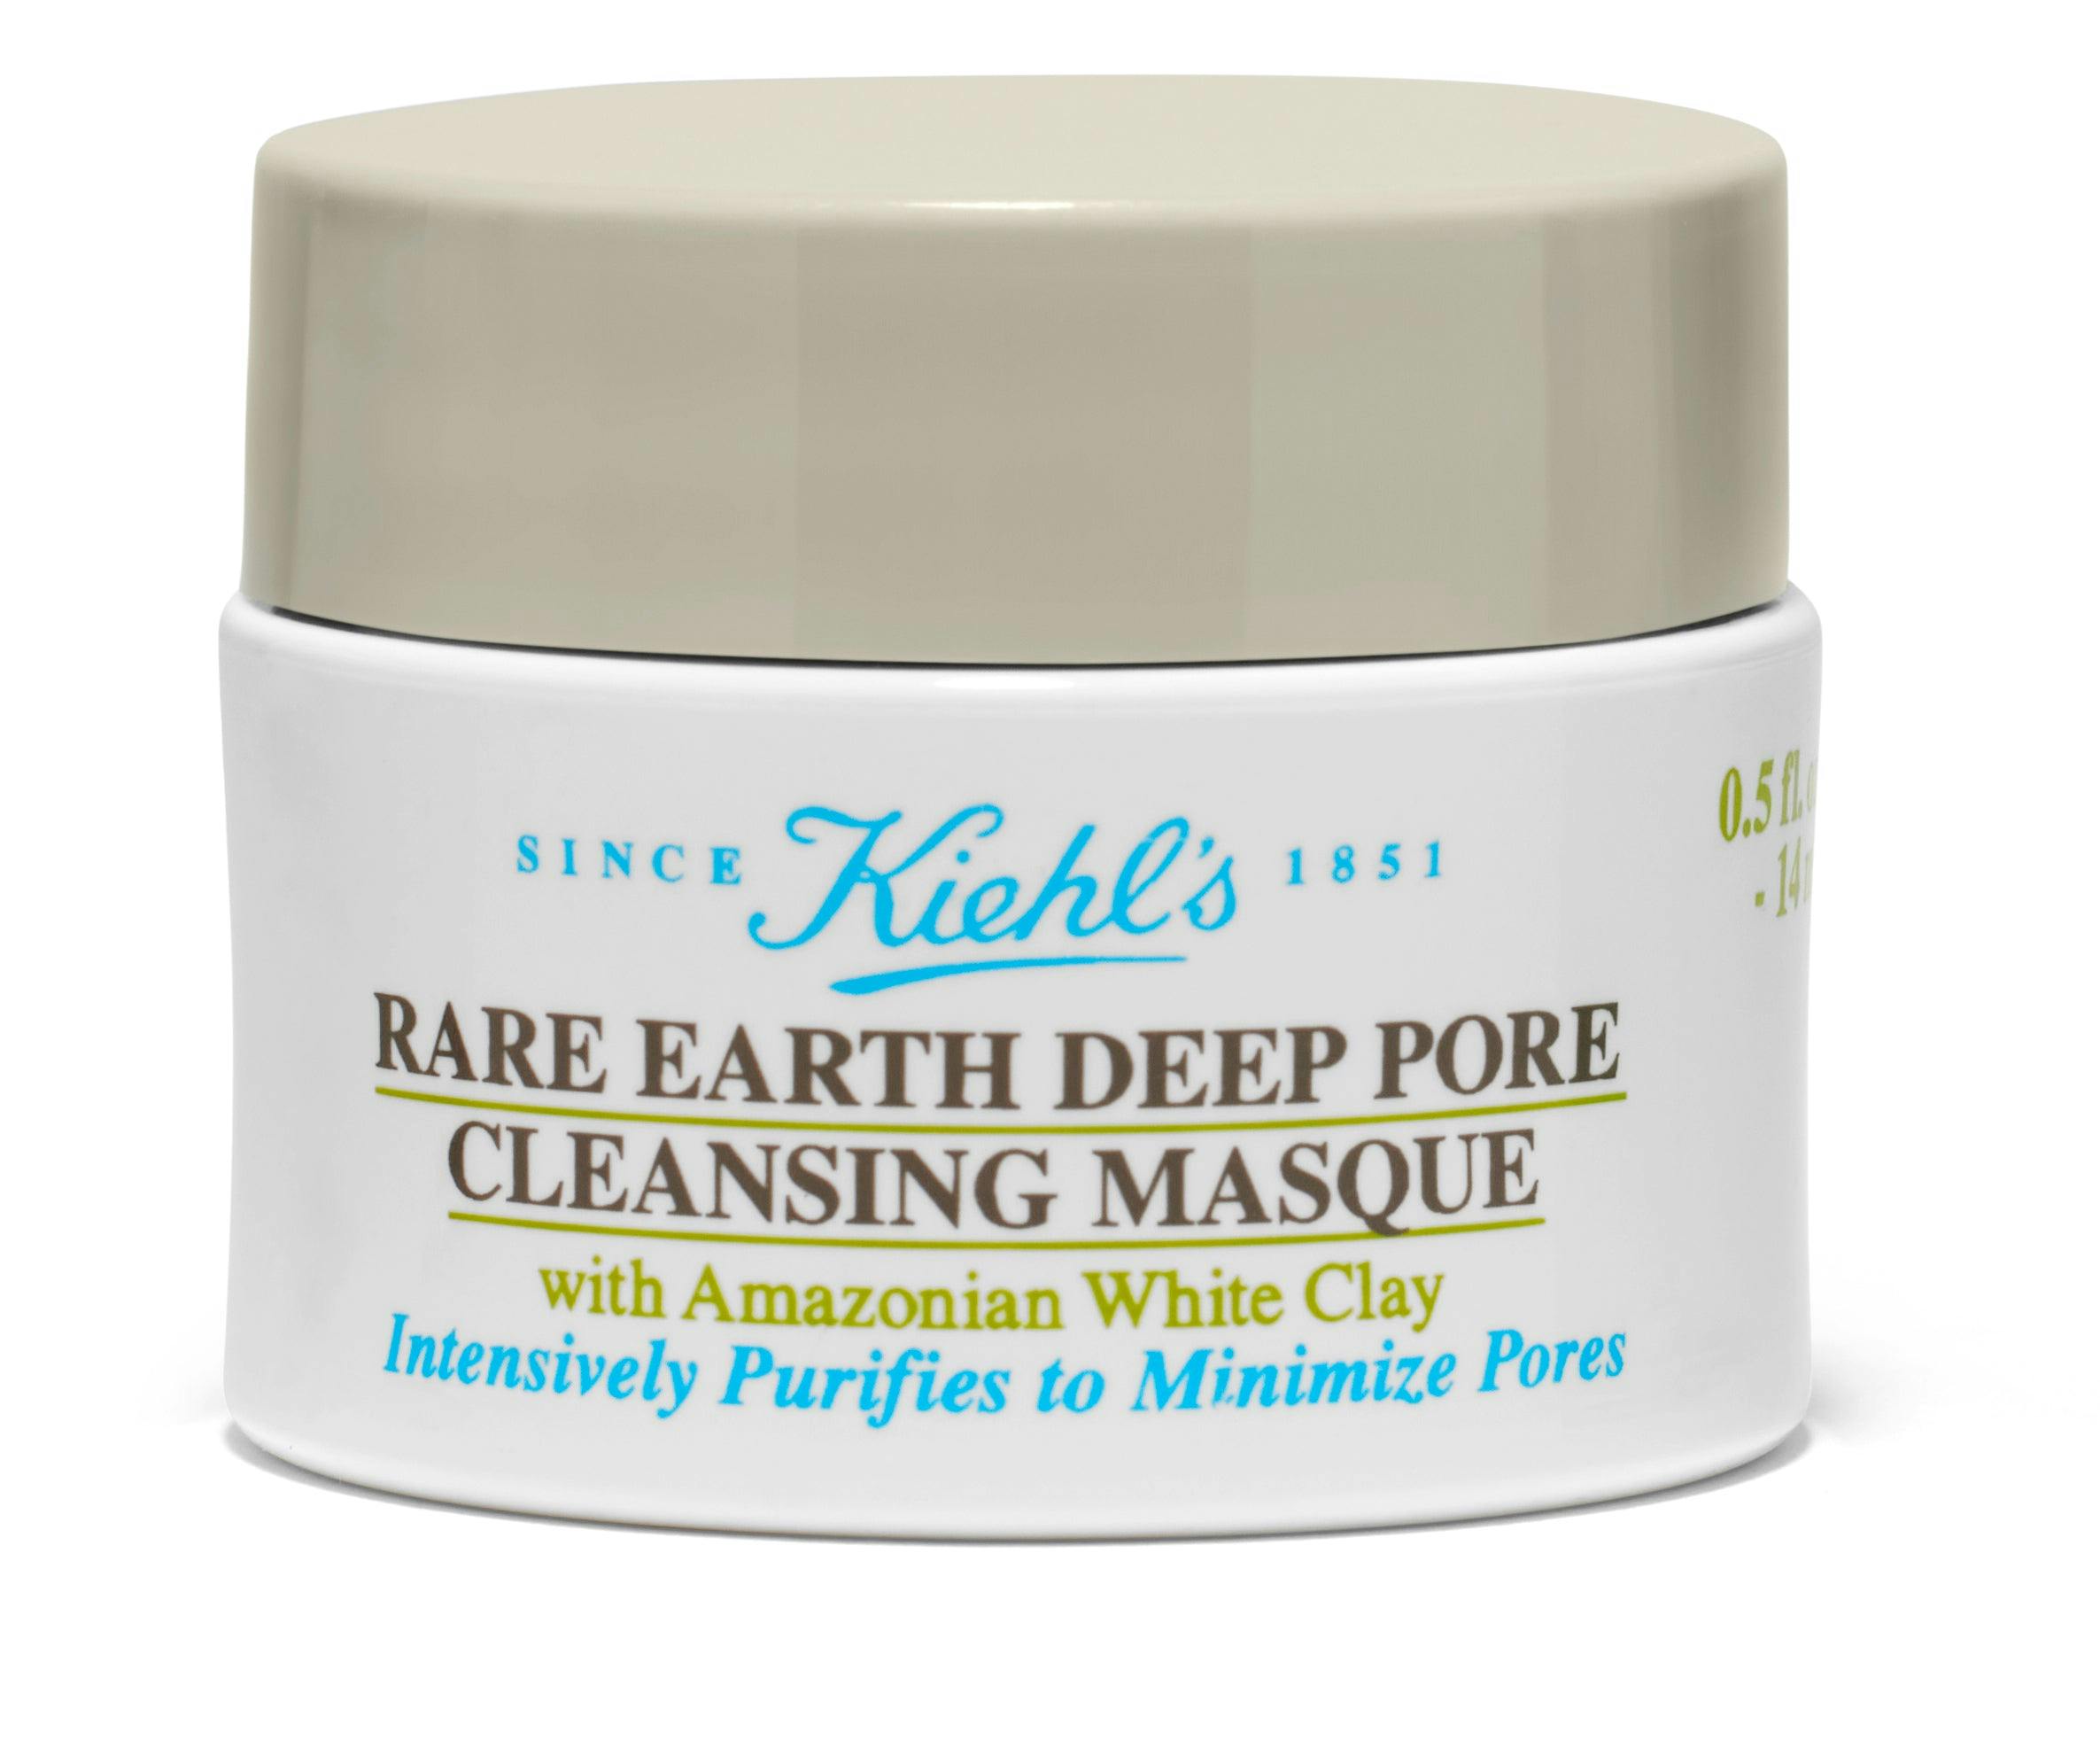 Rare Earth Pore Cleansing Masque Rare Earth Pore Cleansing Masque - Deluxe Sample 1